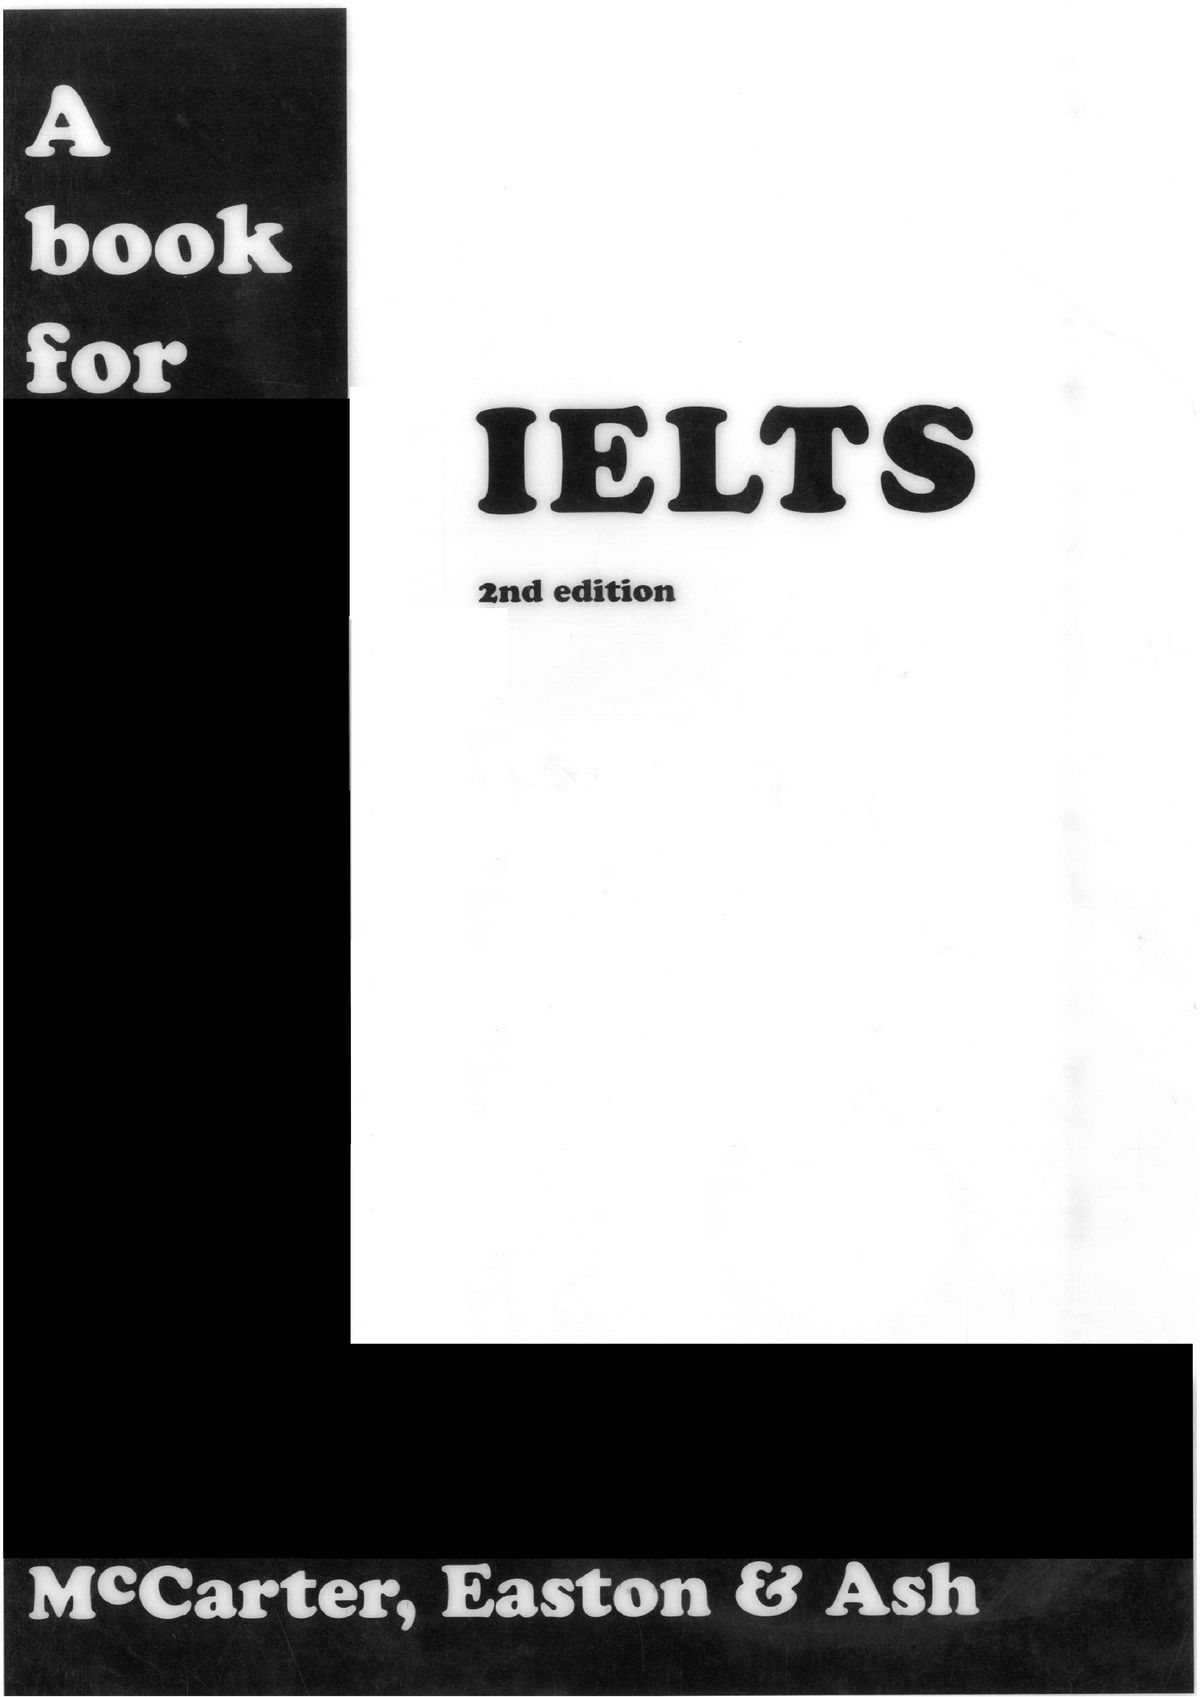 a-book-for-ielts-good-book-preface-this-is-a-self-study-publication-with-two-audio-cassettes